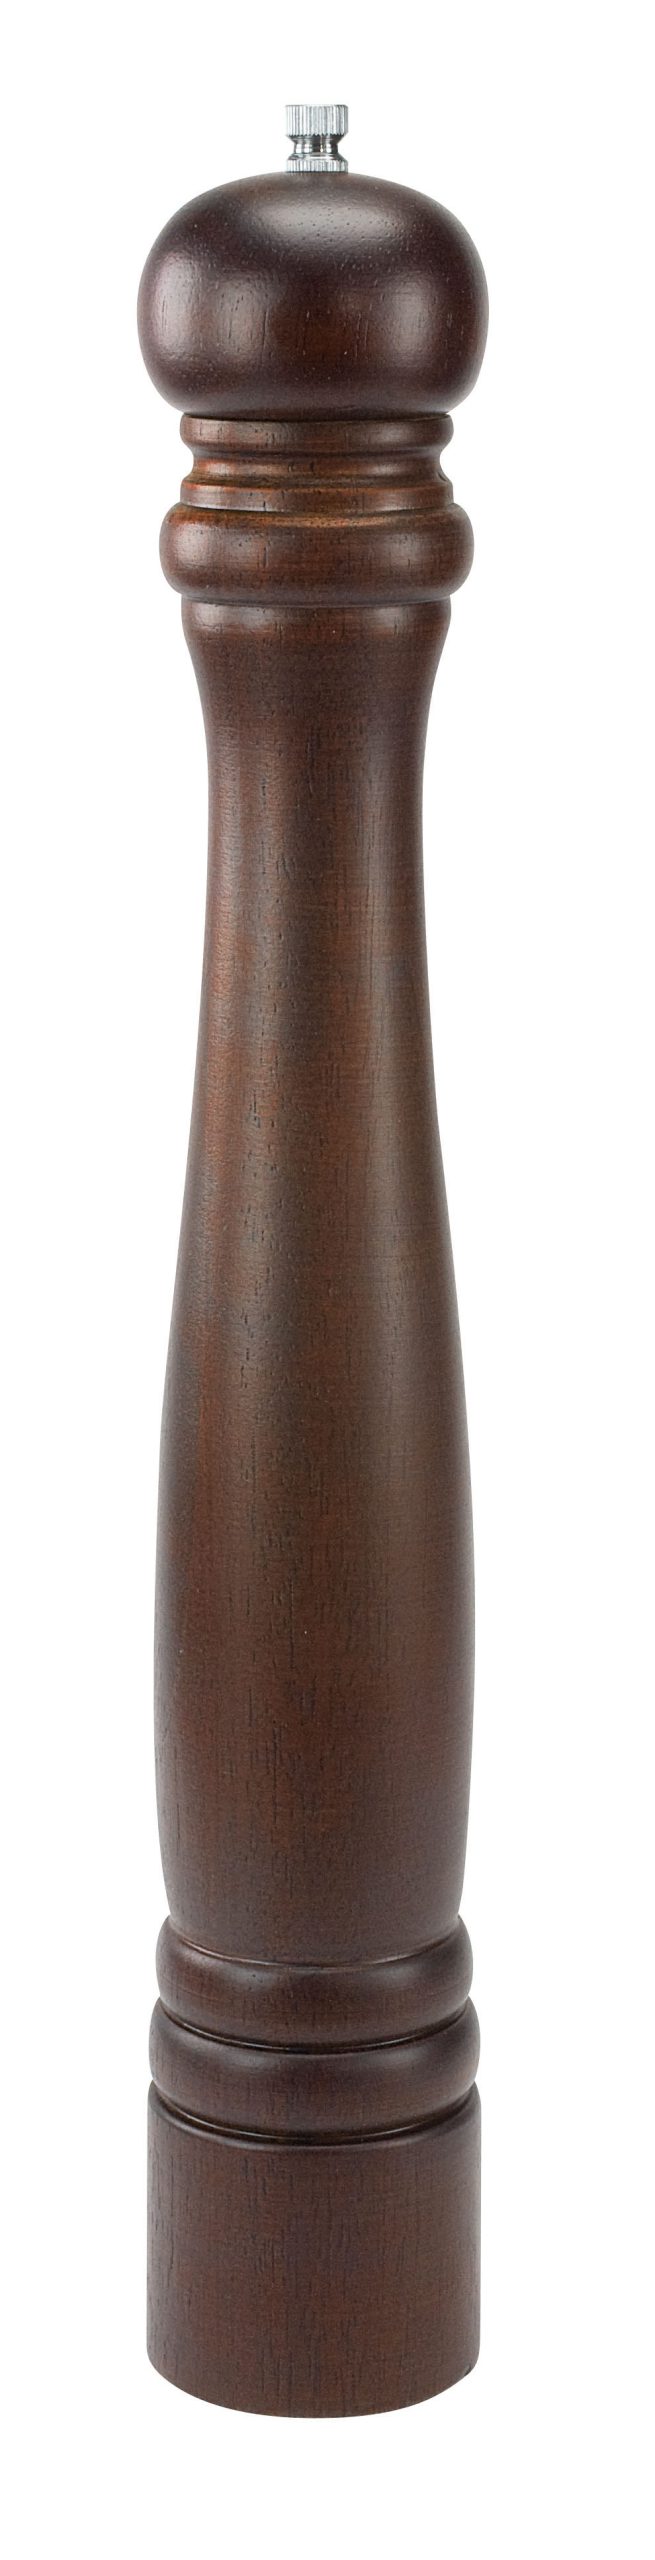 Wooden Pepper mill - Salt mill with ceramic grinder 45cm ILSA Italy